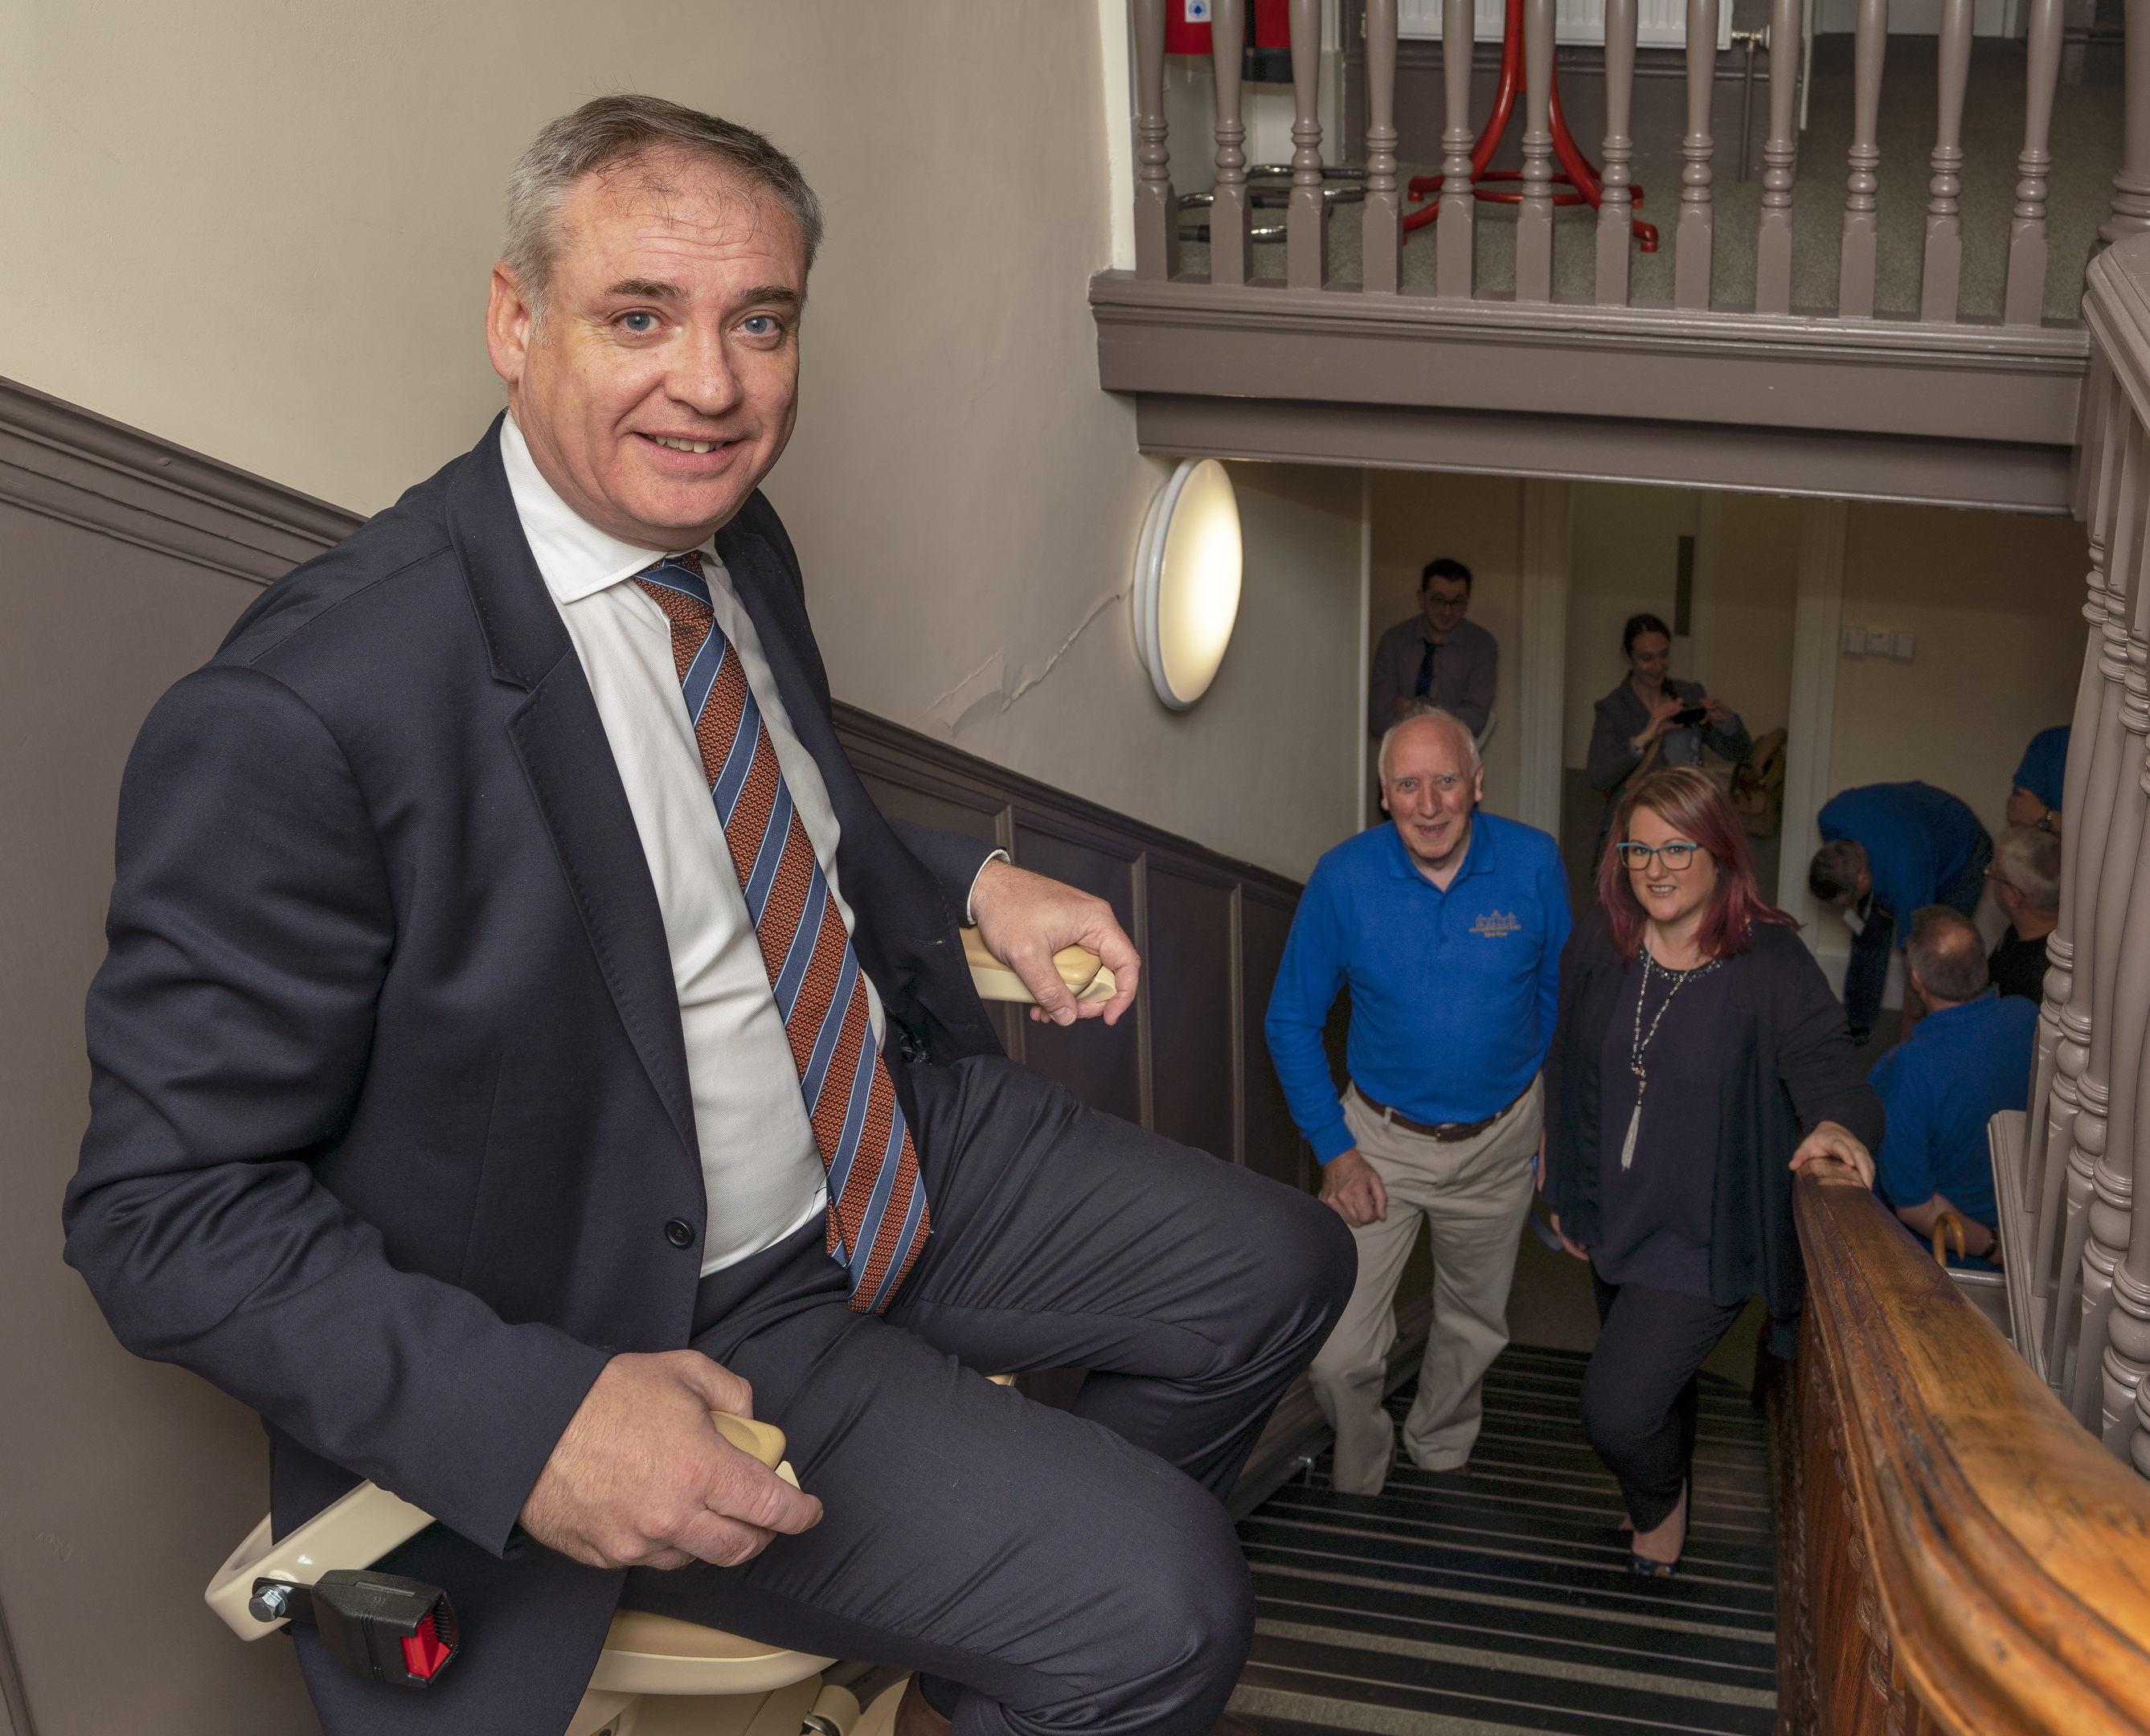 MSP Richard Lochhead uses the seat lift to negotiate the stairs watched by David Thow, Chairman of Fochabers Mens Shed and Morven Smith, Head of Community Investment SSE Plc.